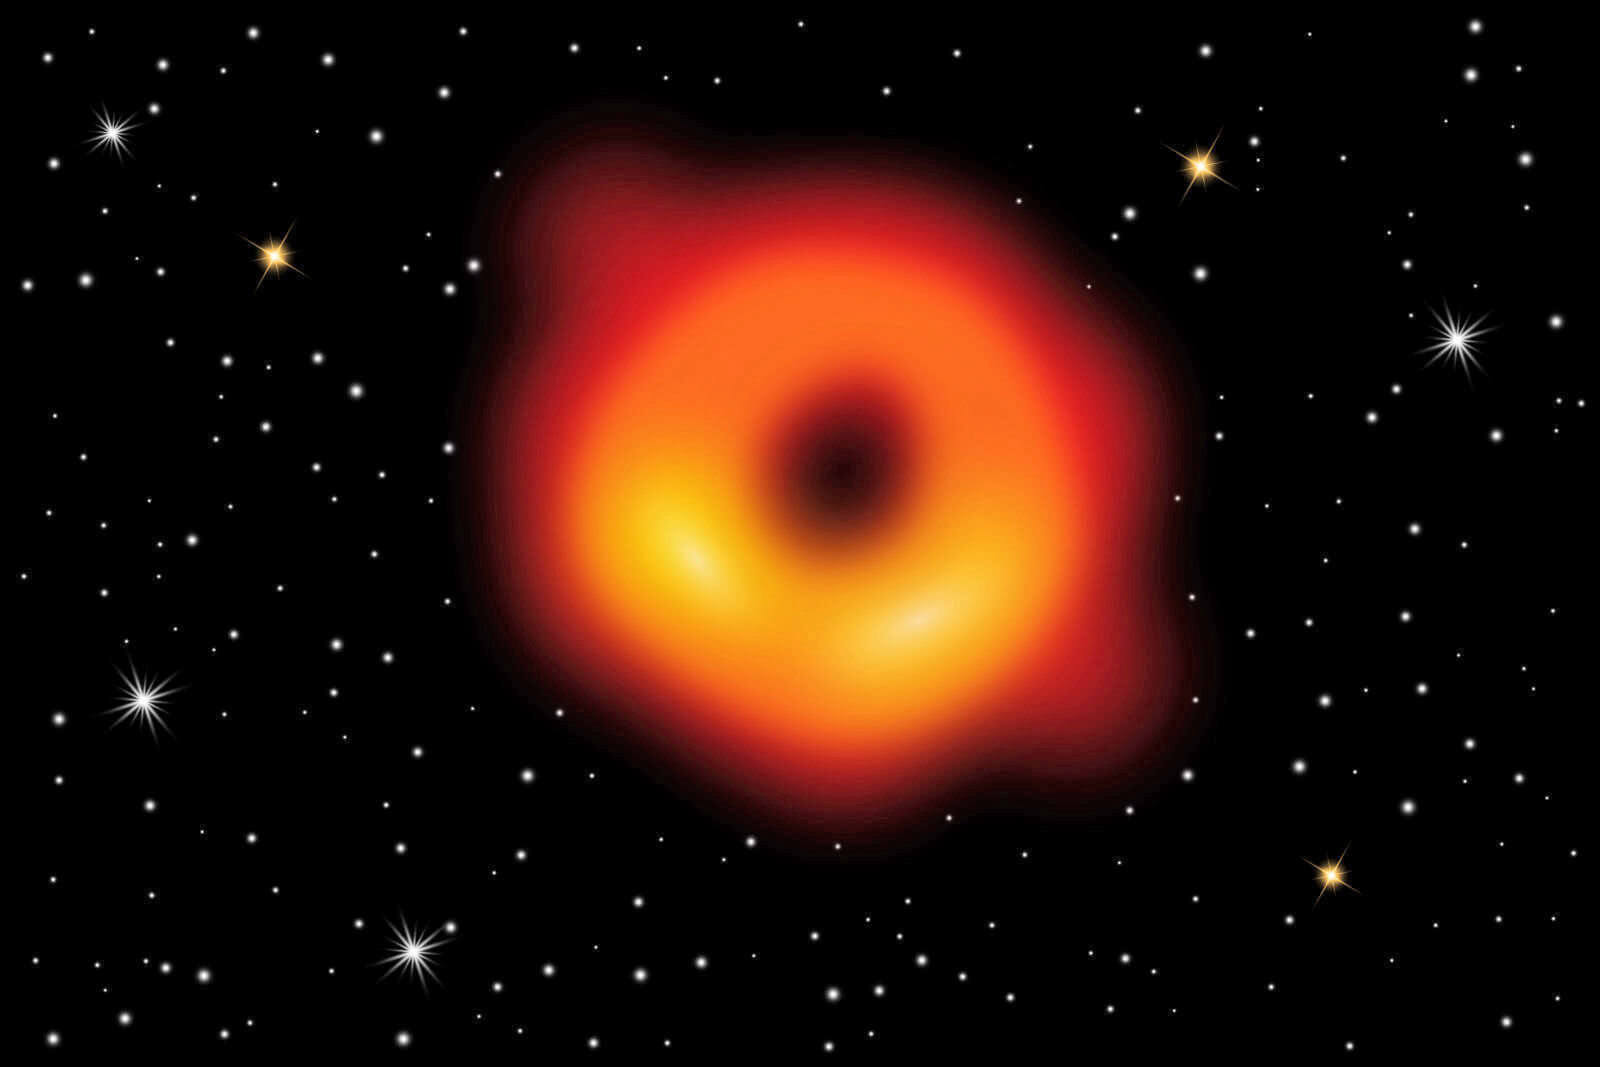 Black Holes are as bold as “bowling balls” - TWIFT